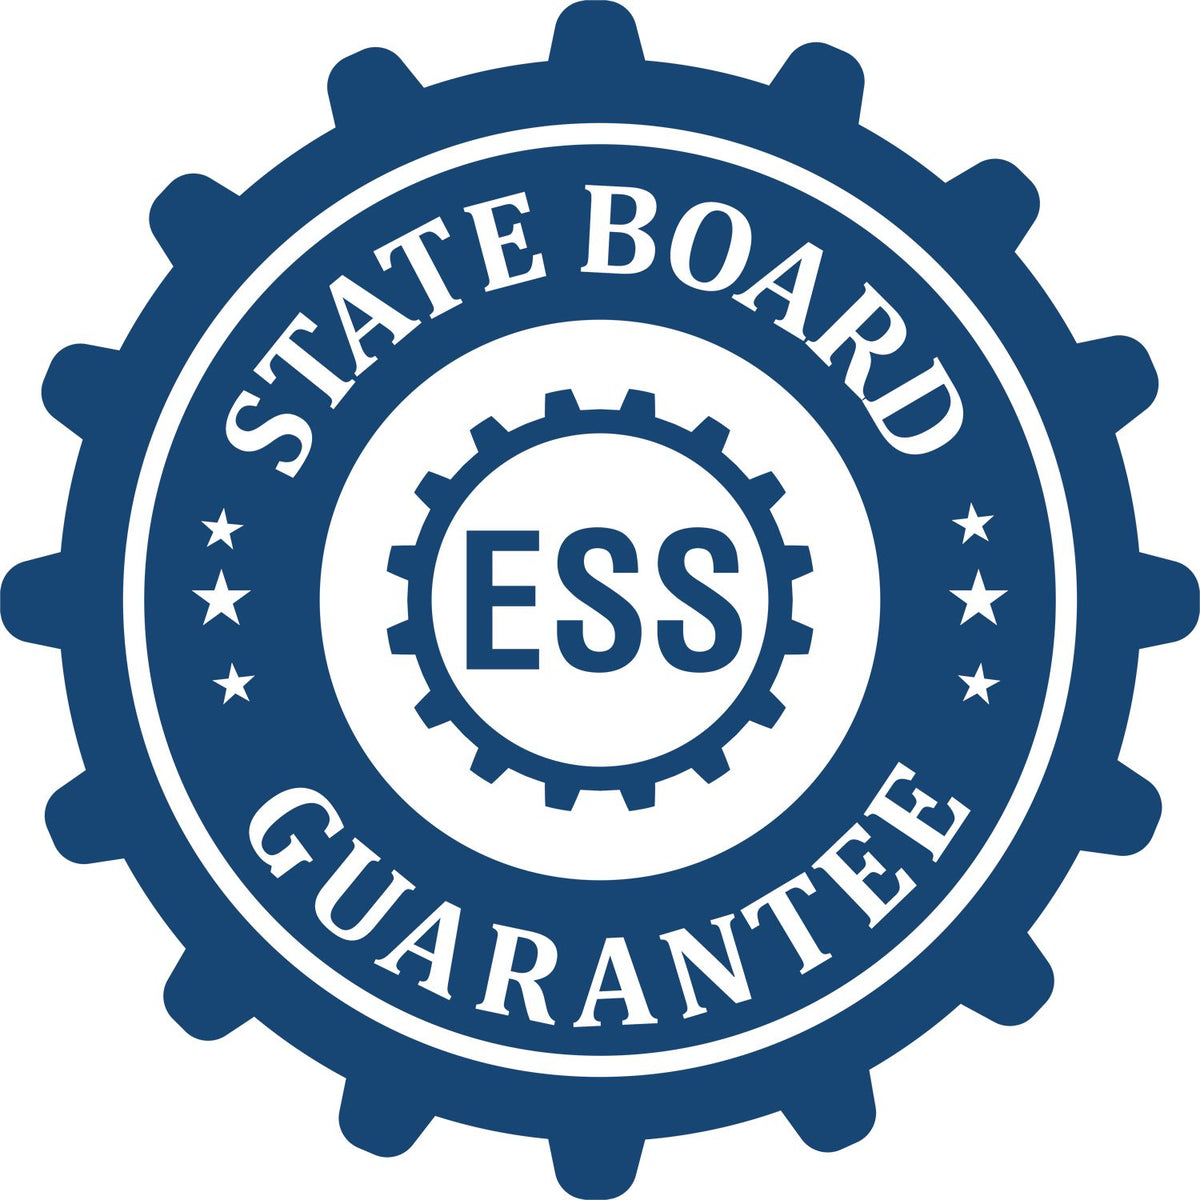 An emblem in a gear shape illustrating a state board guarantee for the Hybrid Ohio Land Surveyor Seal